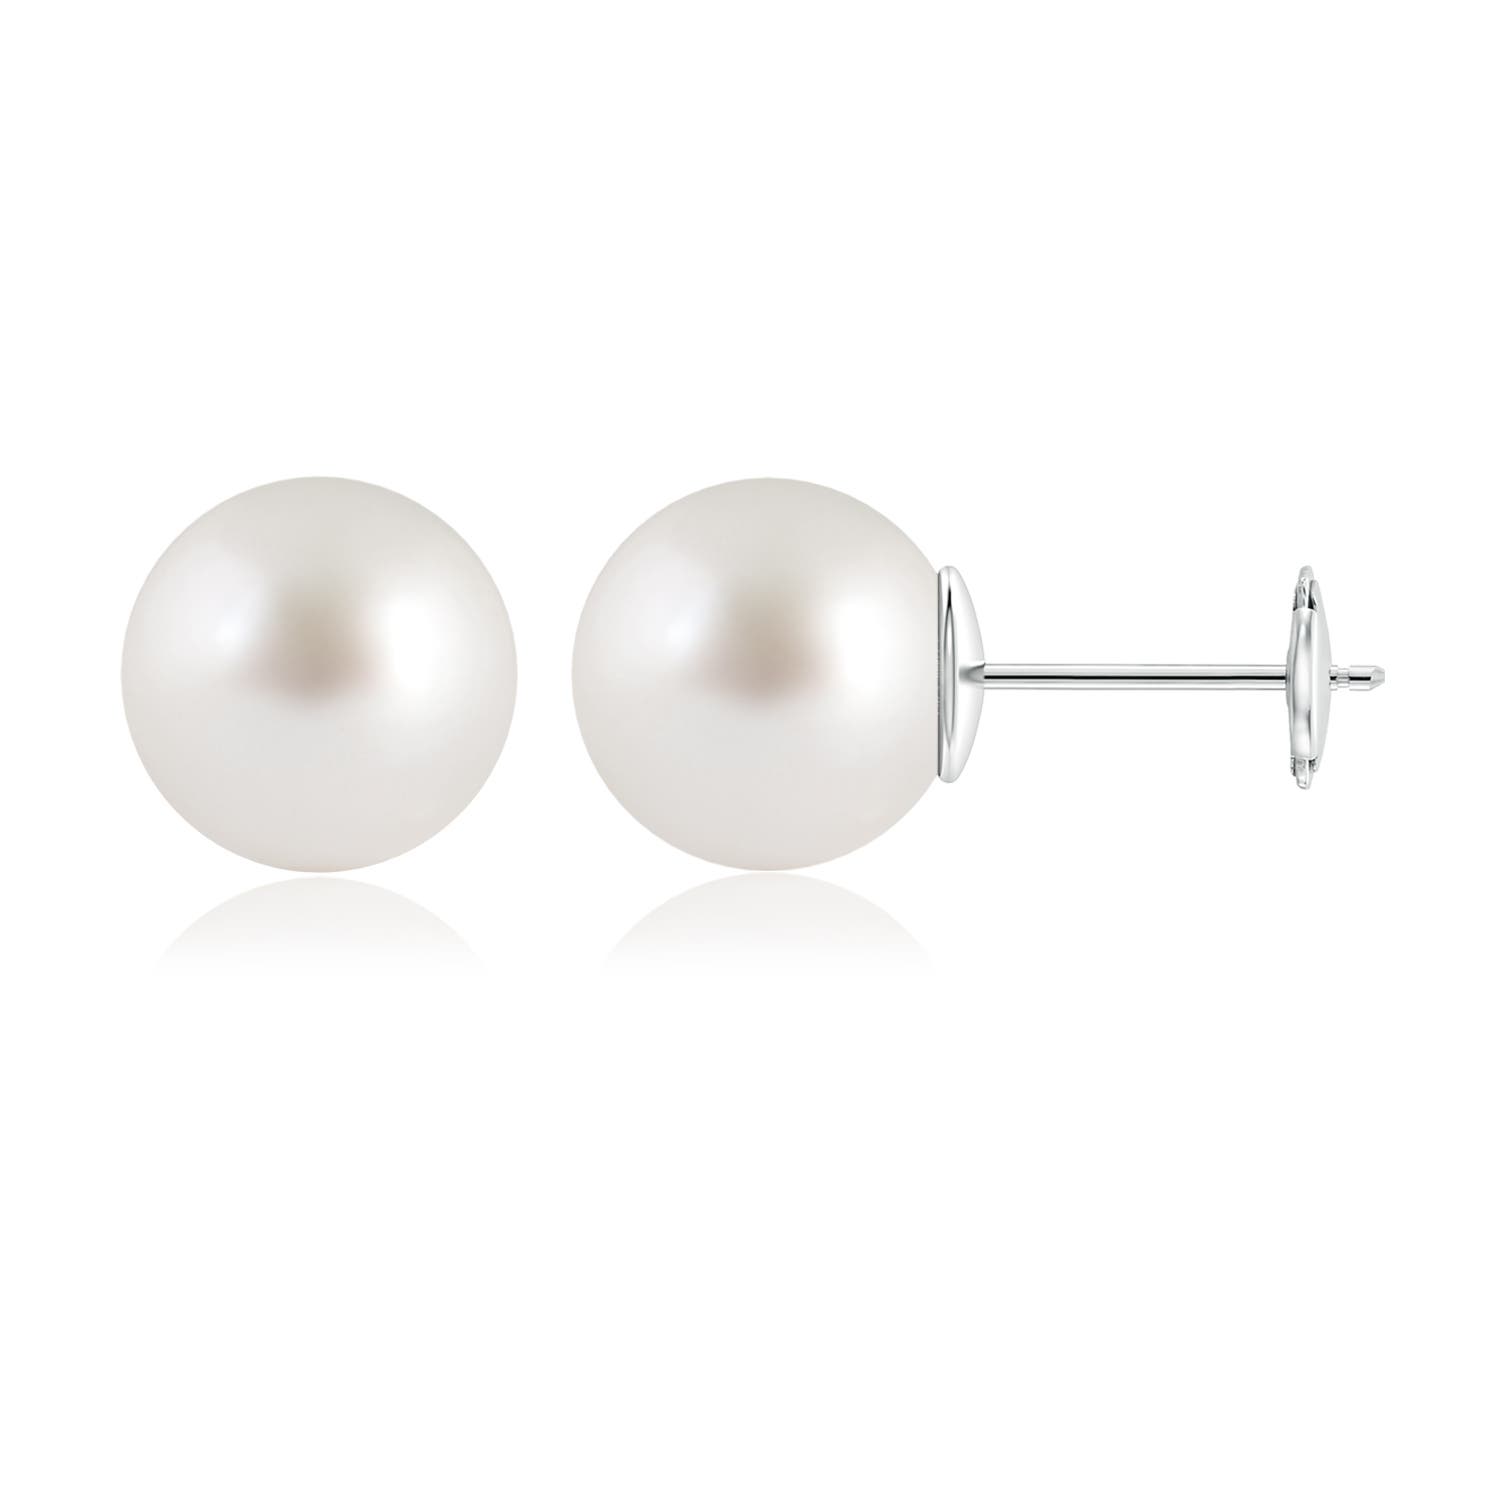 AAAA - South Sea Cultured Pearl / 25 CT / 14 KT White Gold